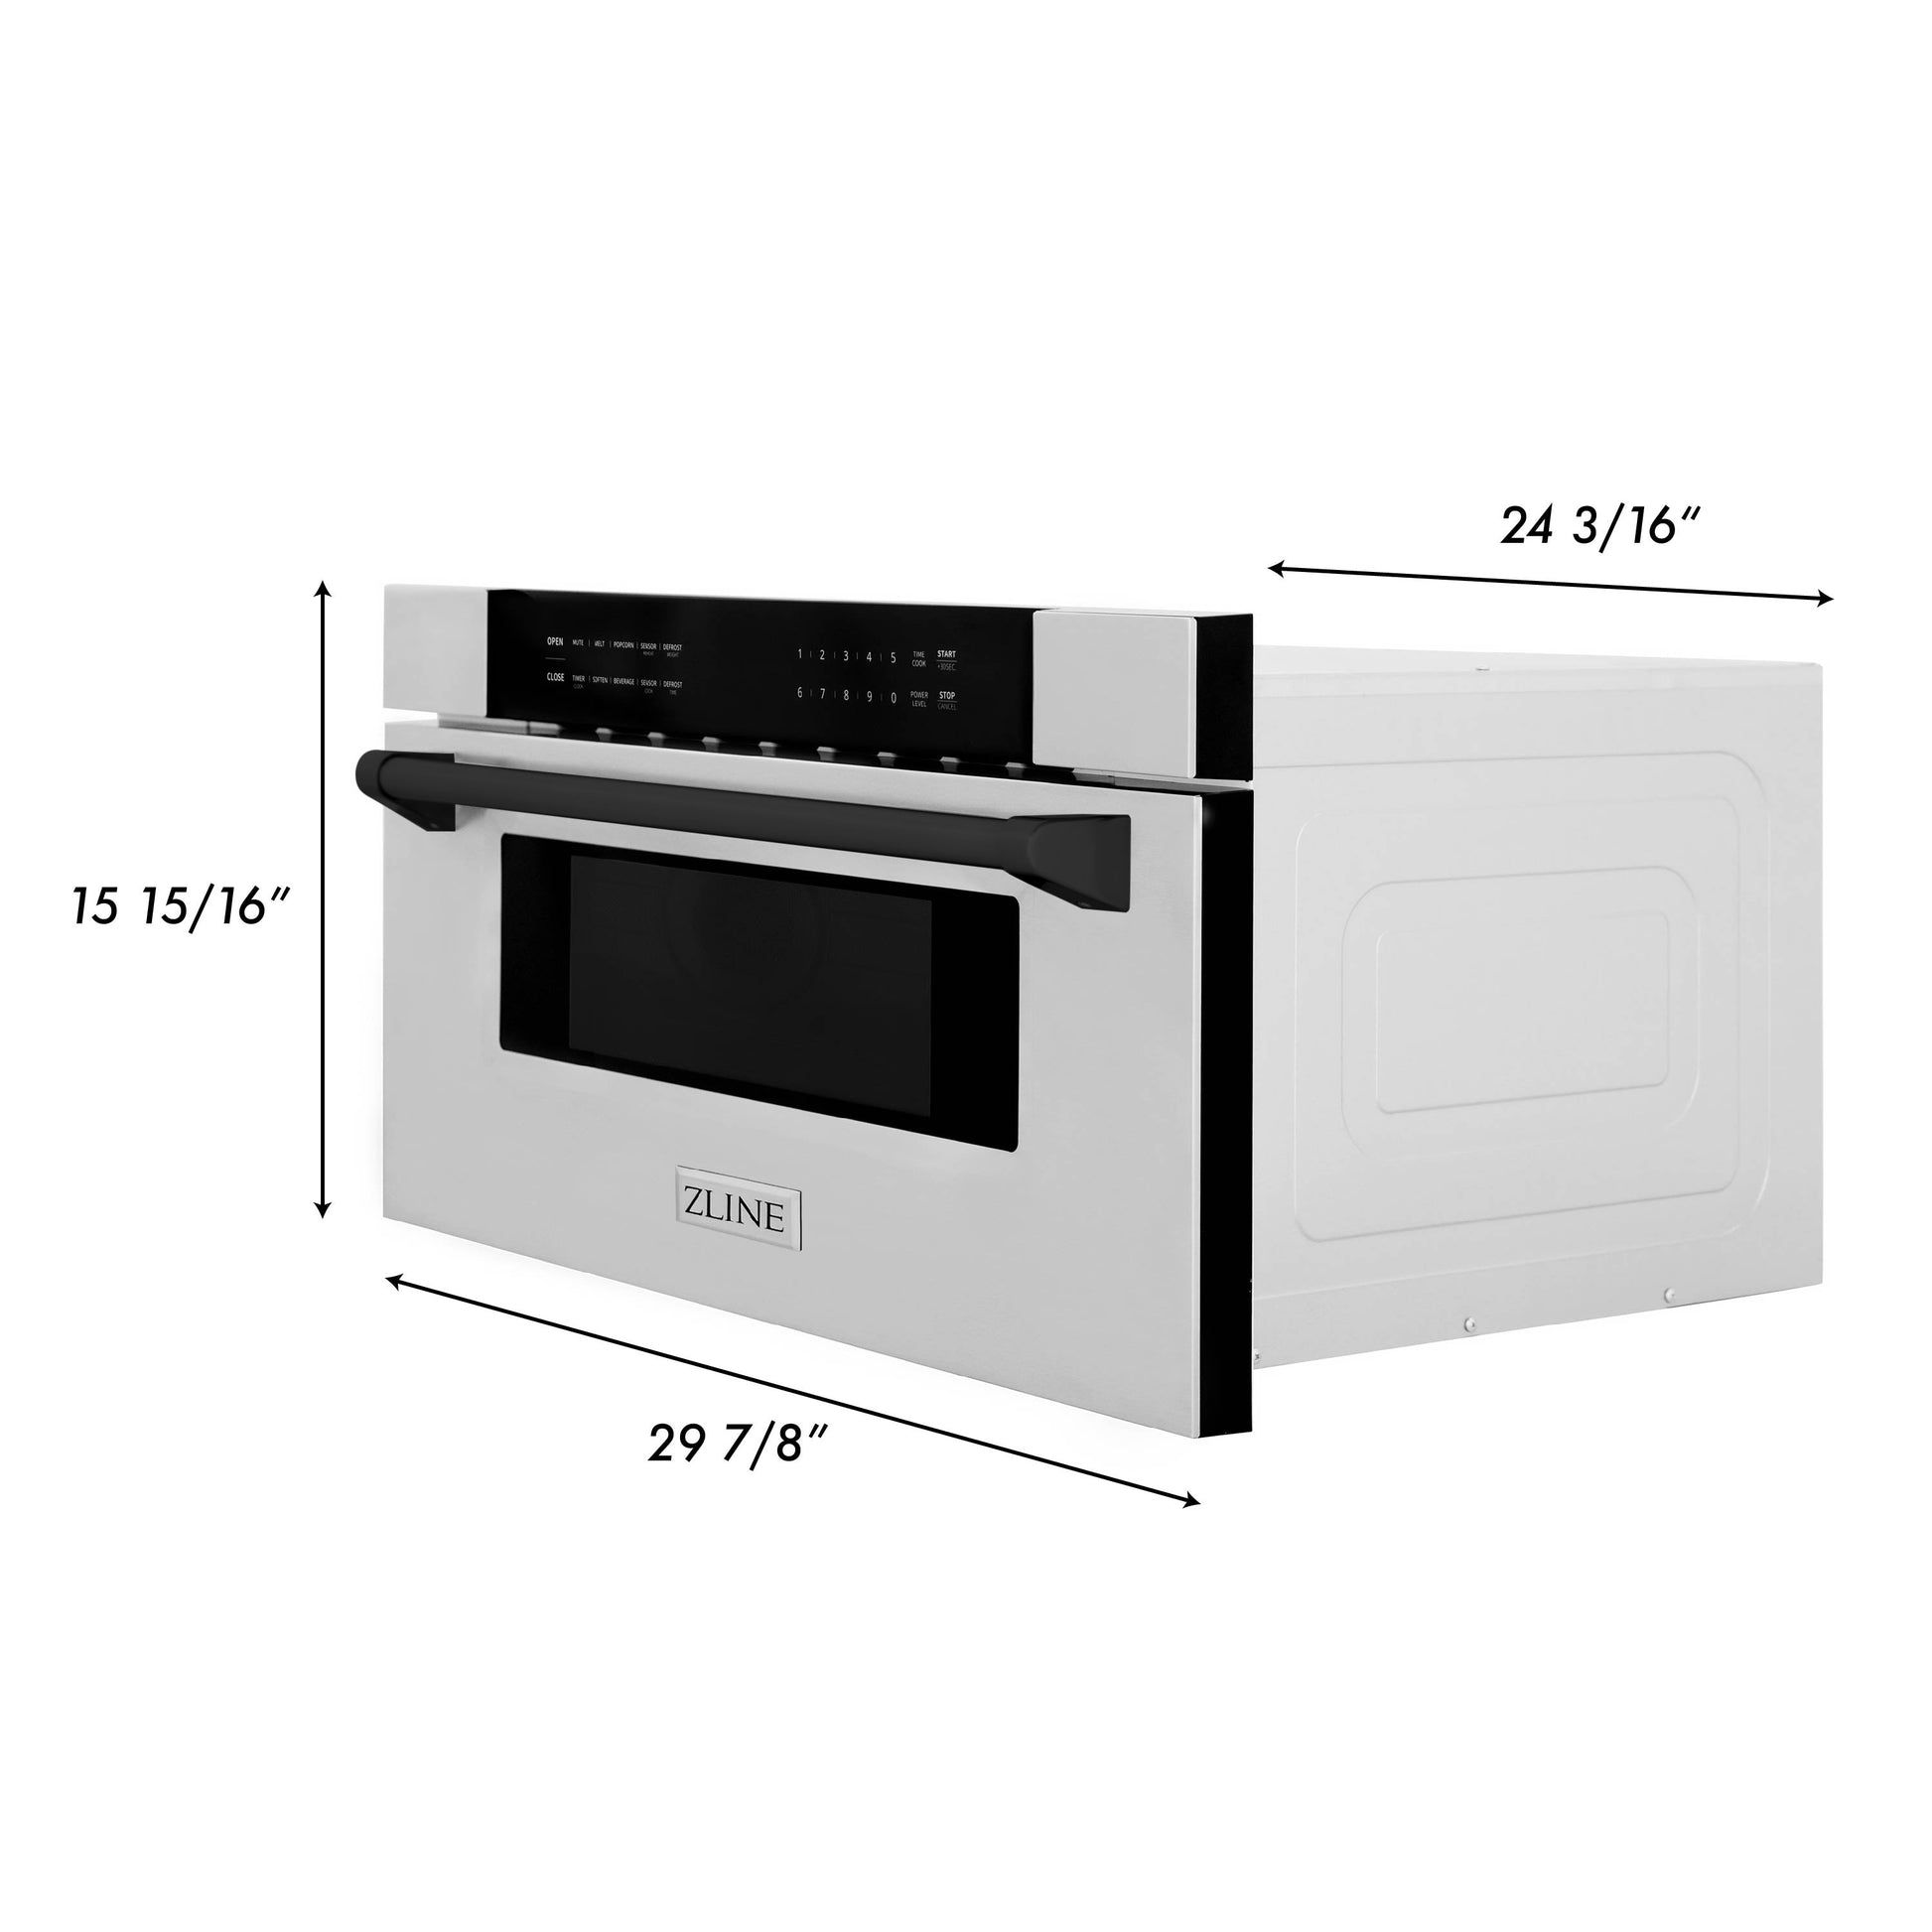 ZLINE Autograph Edition 30" Built-In Microwave Drawer - Stainless Steel with Accents